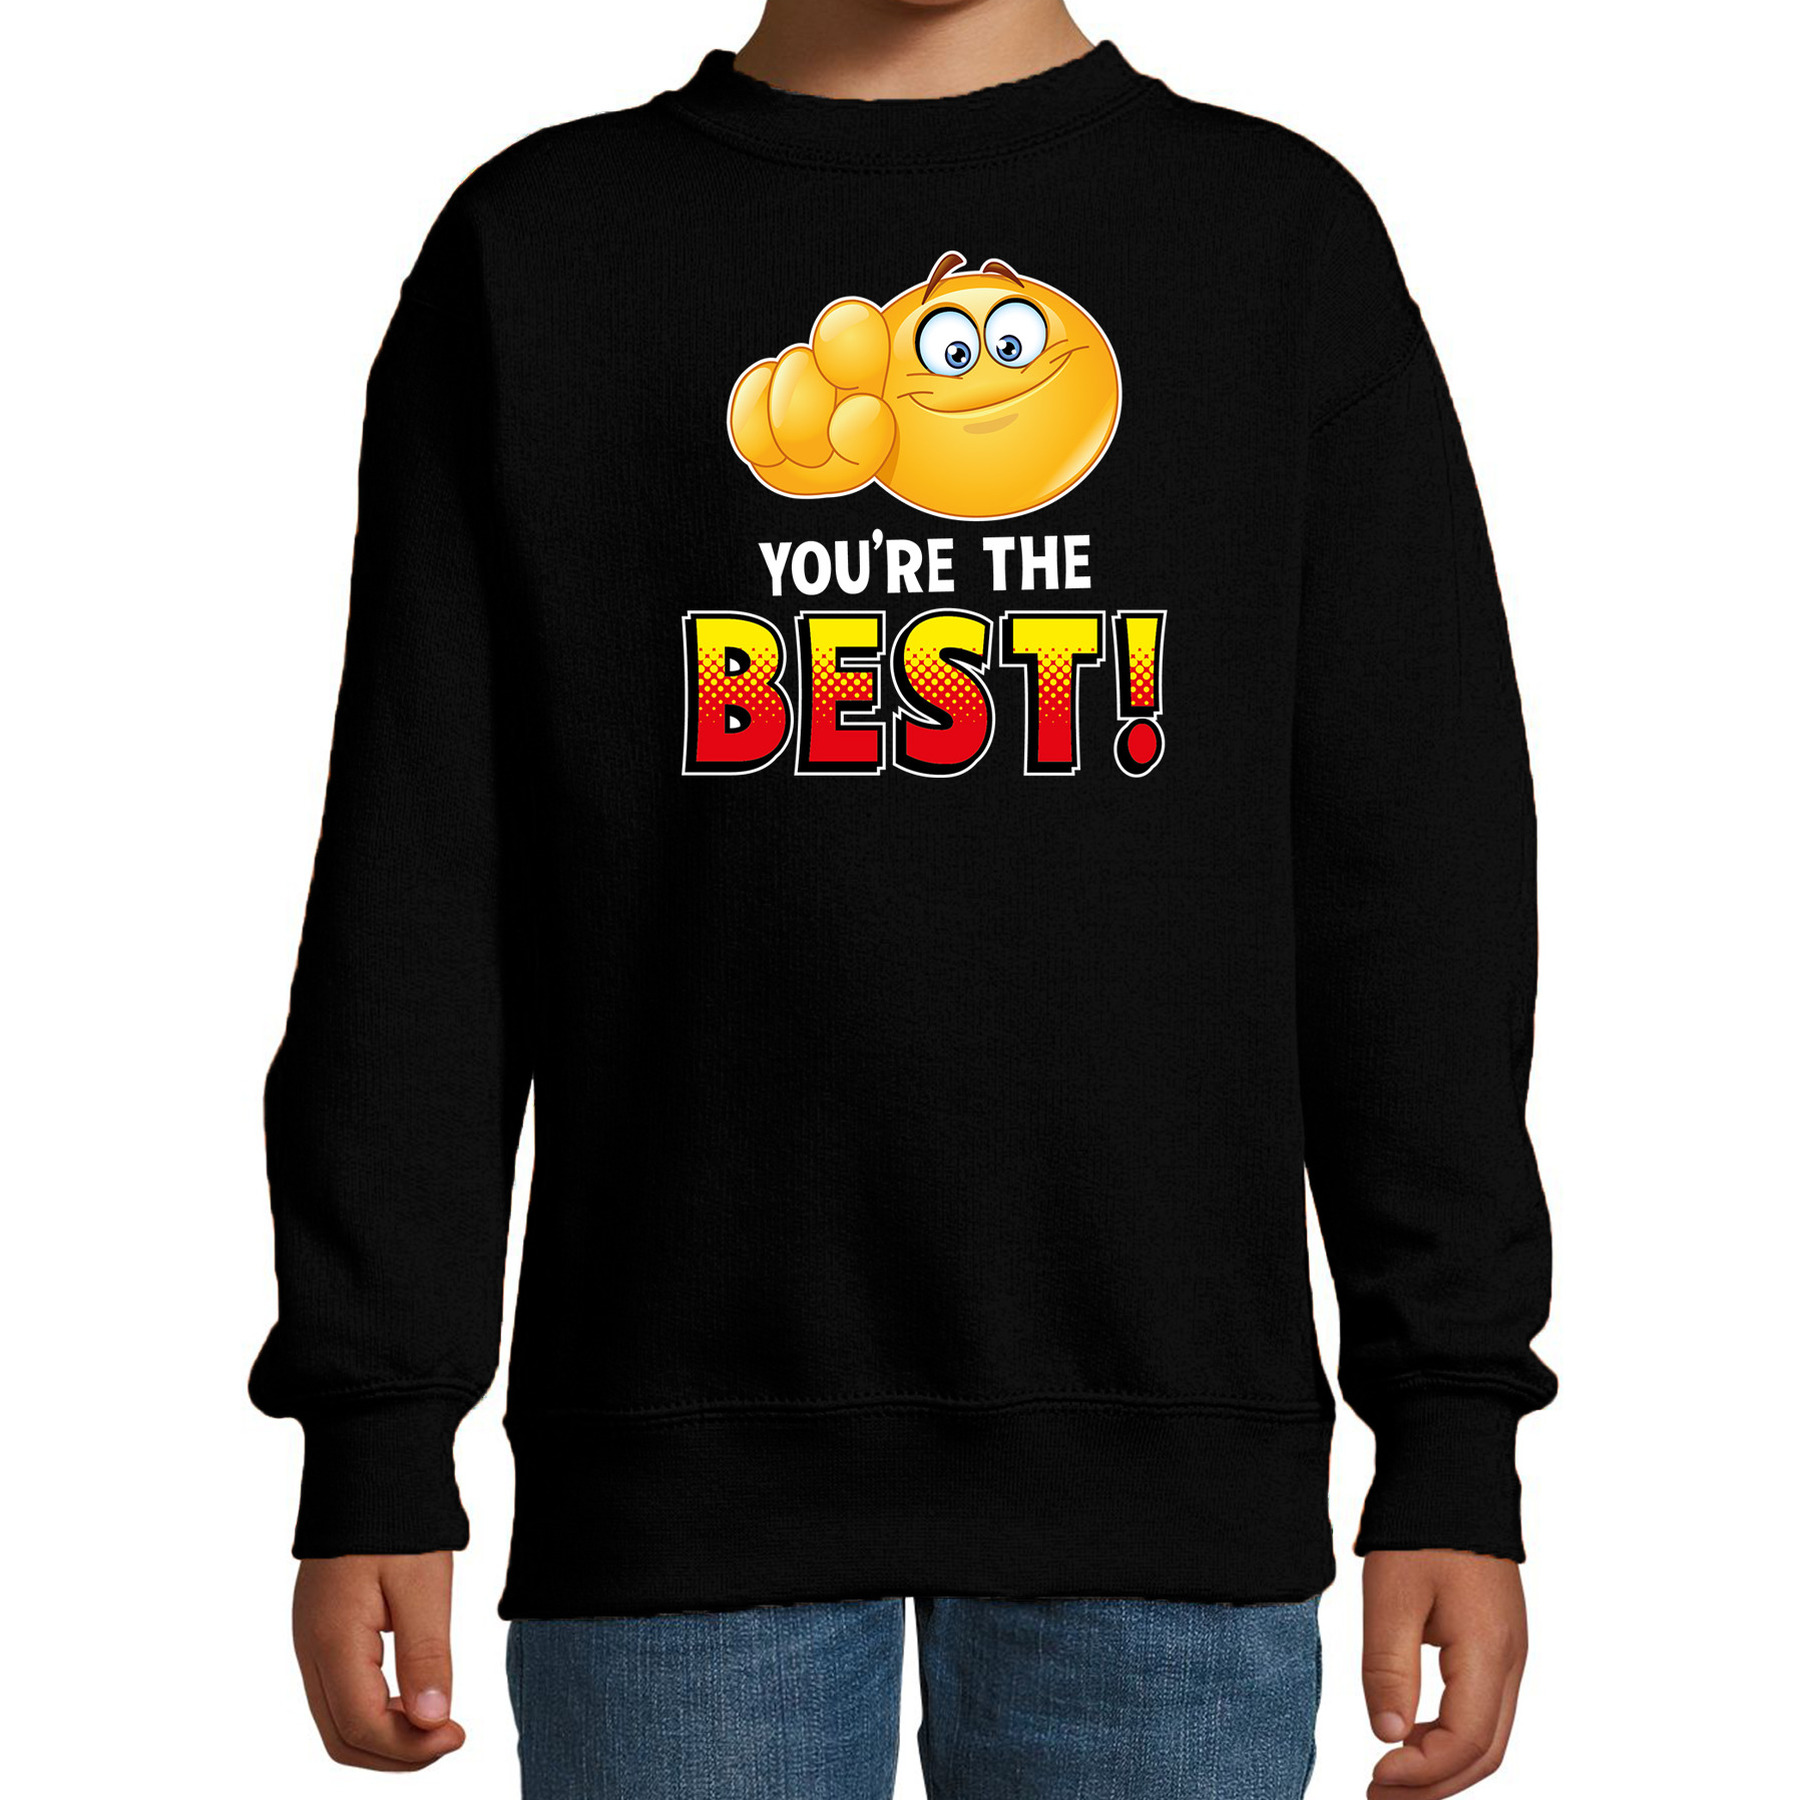 Funny emoticon sweater You are the best zwart kids